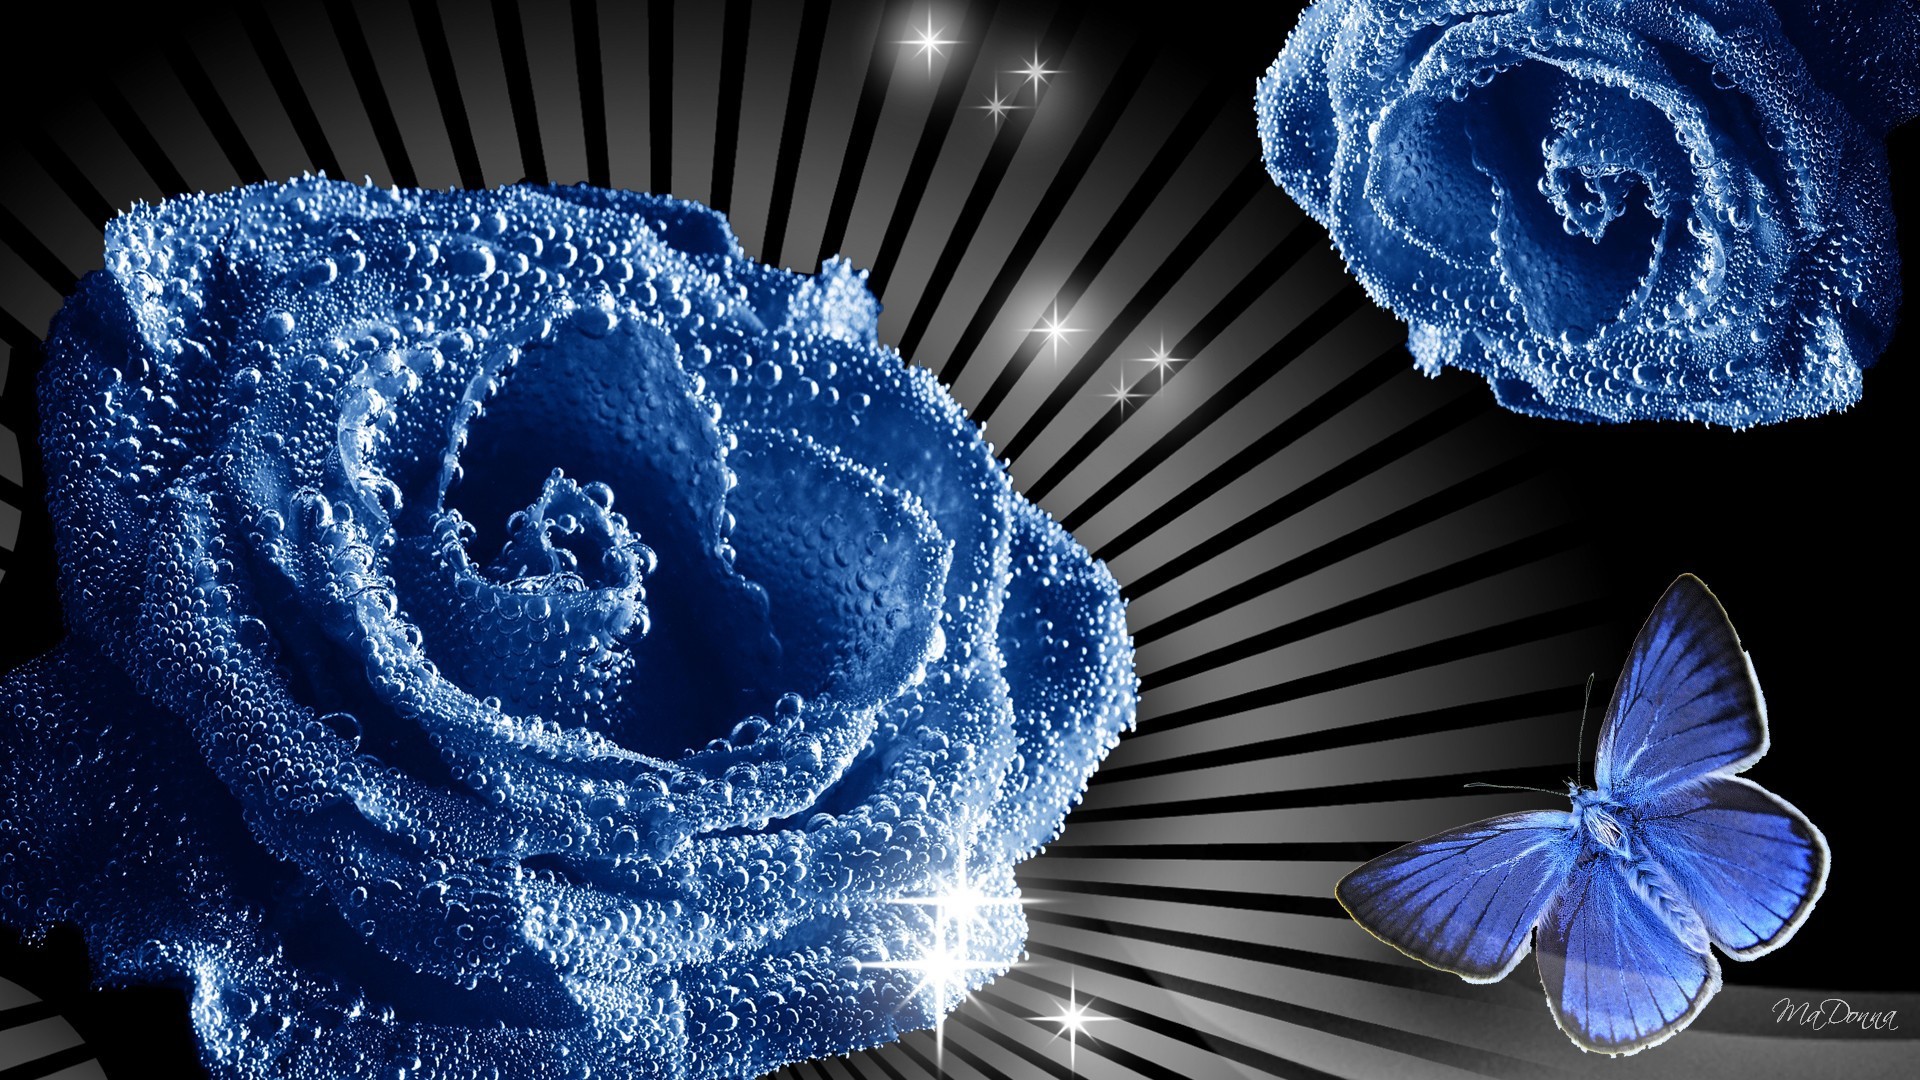 1920x1080 net_Holidays___International_Womens_Day_Blue_rose_and_butterfly__picture_on_March_8_056174_.jpg  (1920Ã1080) | BLUE ROSES BACKGROUND | Pinterest | Blu…